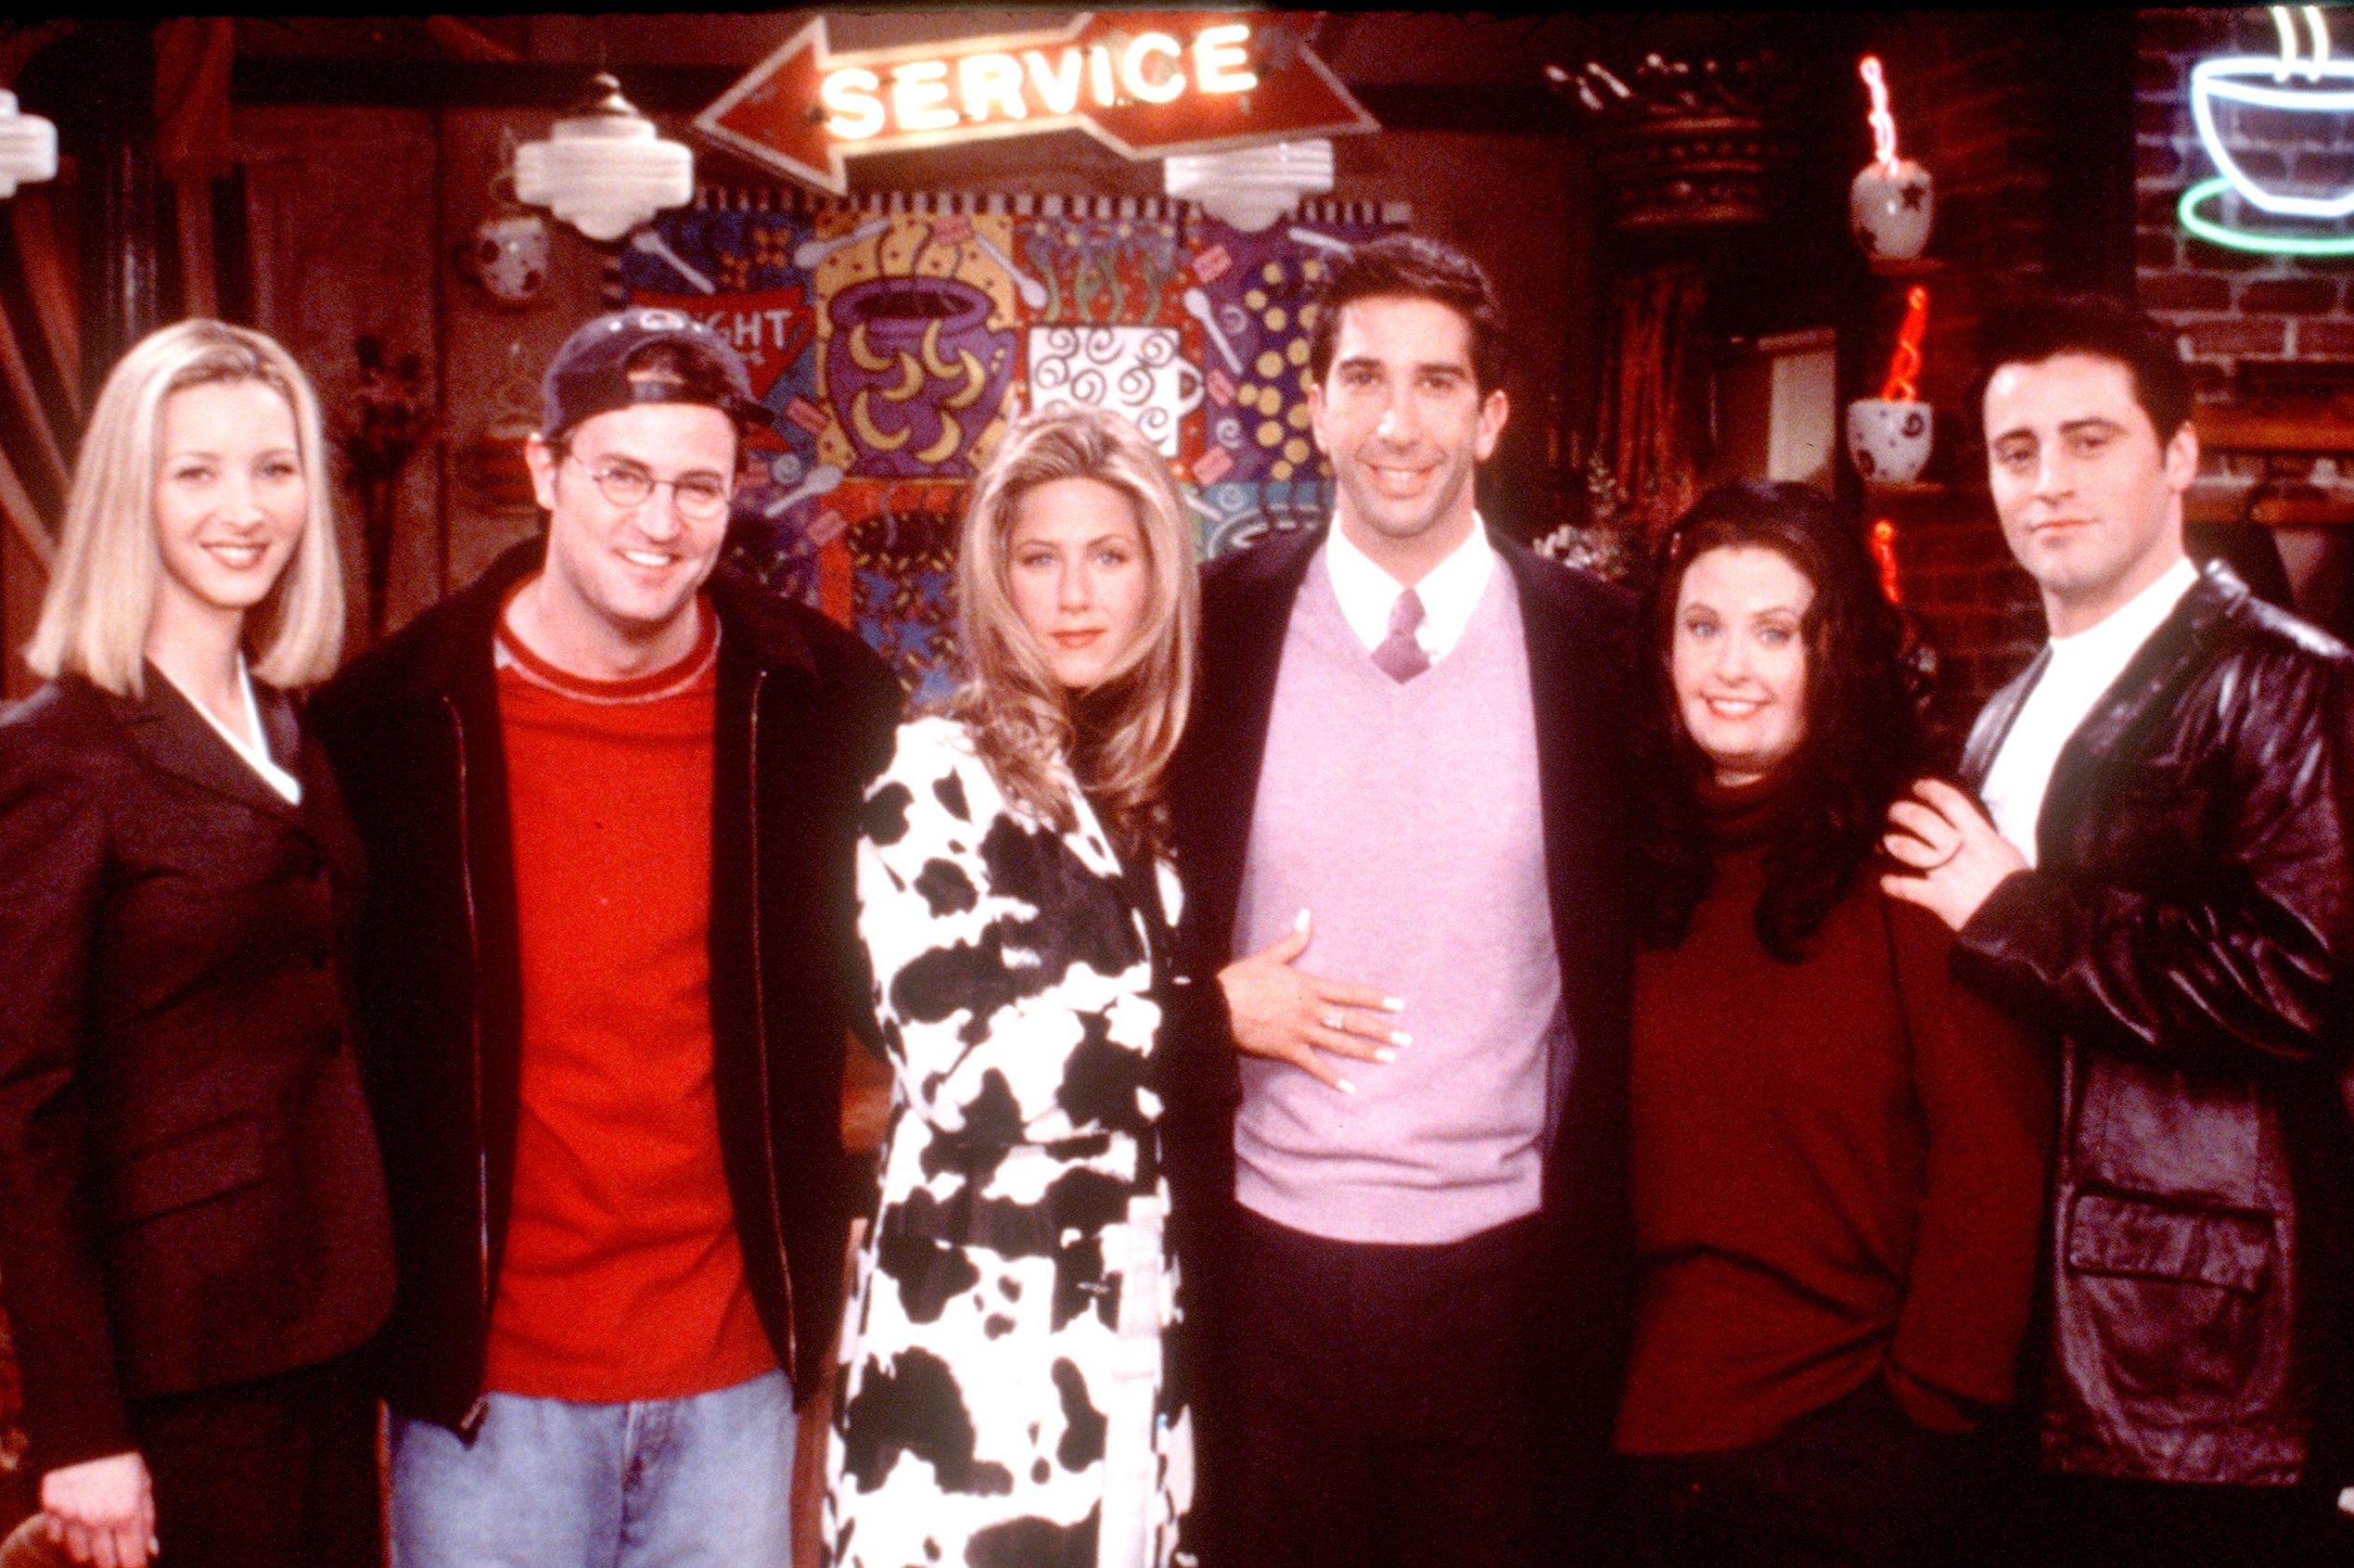 Perry alongside his co-stars in a promotional image for the hit sitcom